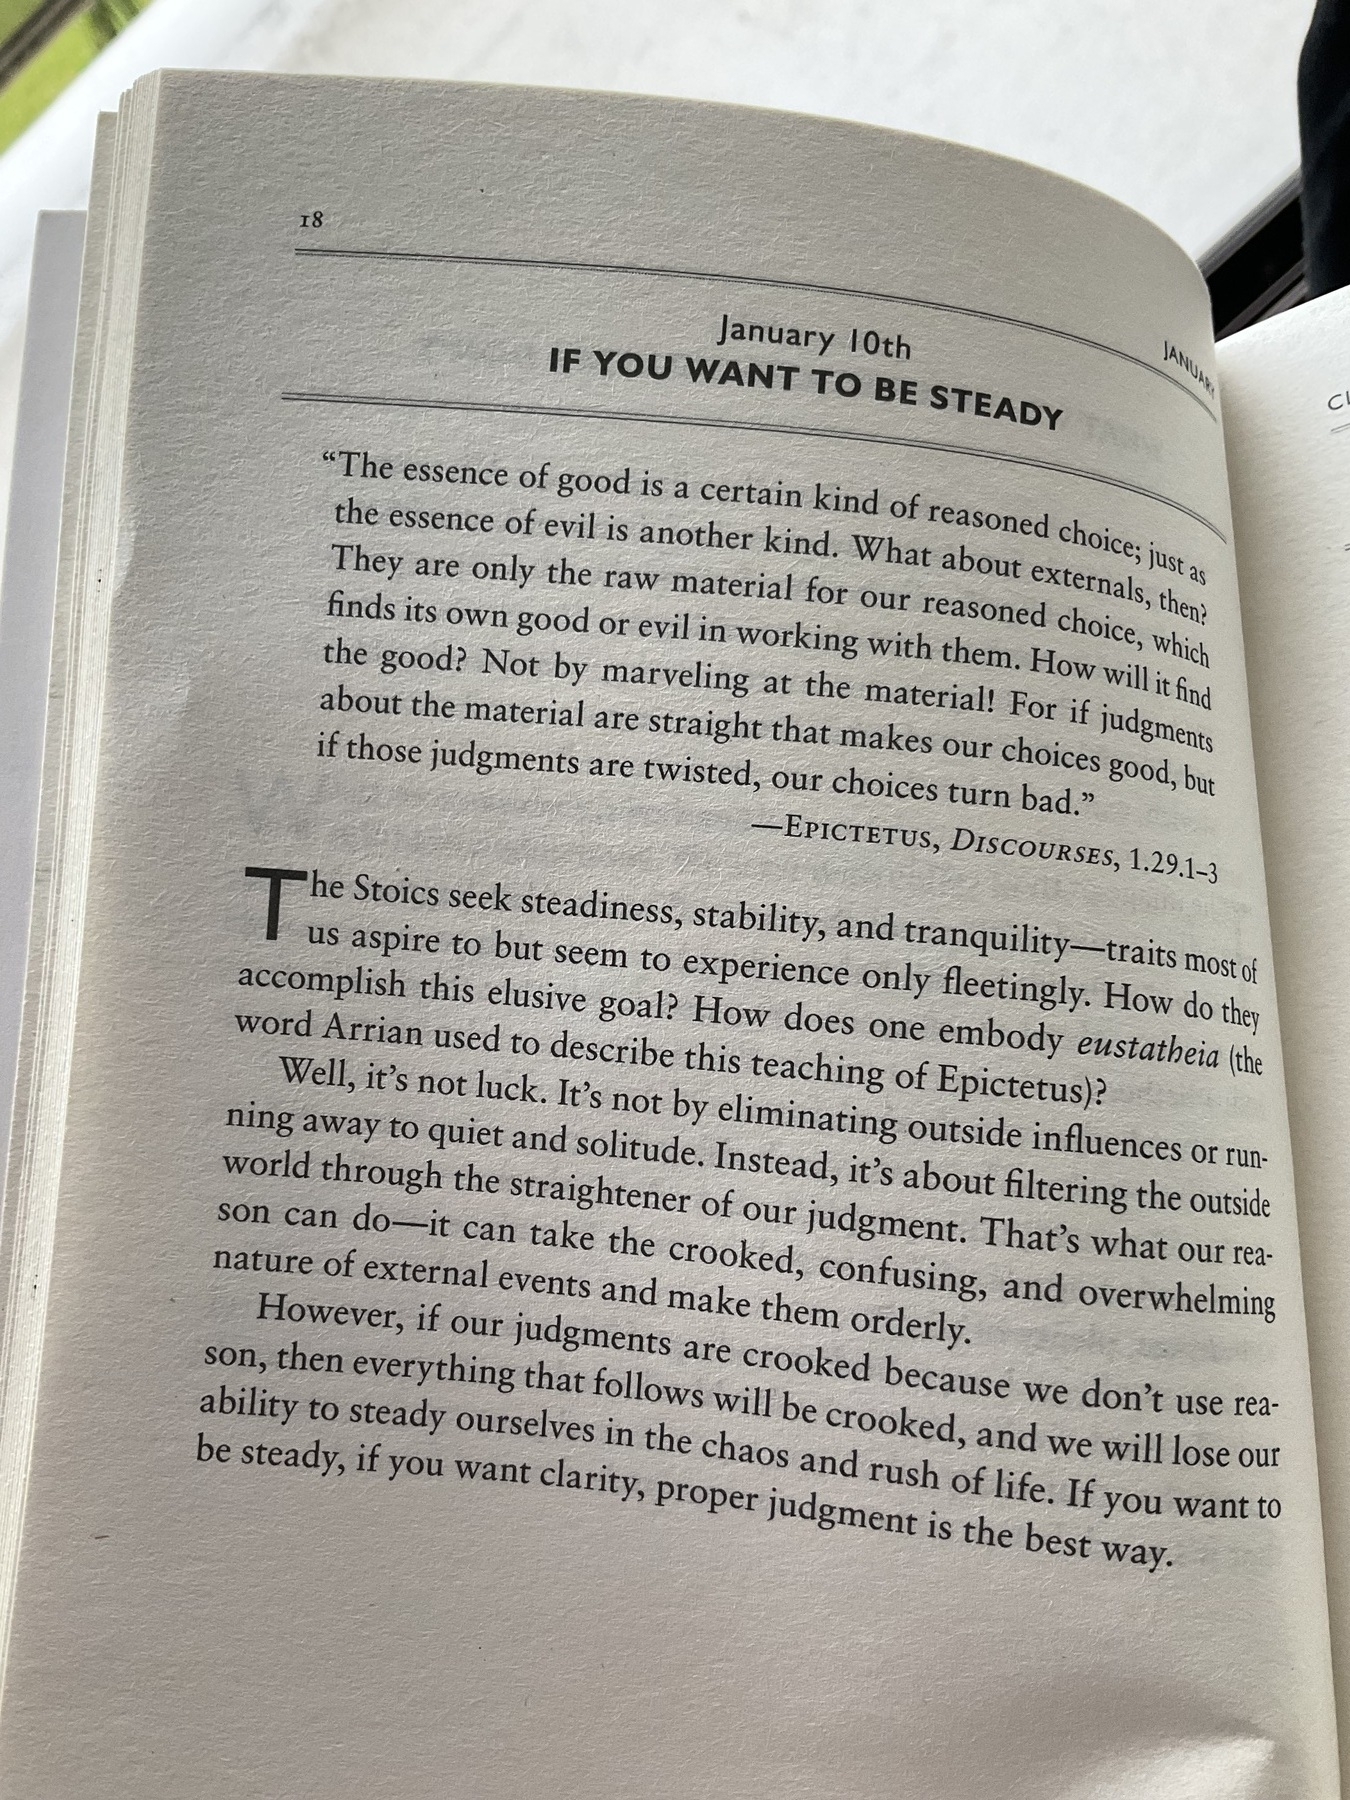 The Daily Stoic … The Daily Quote … Page 18